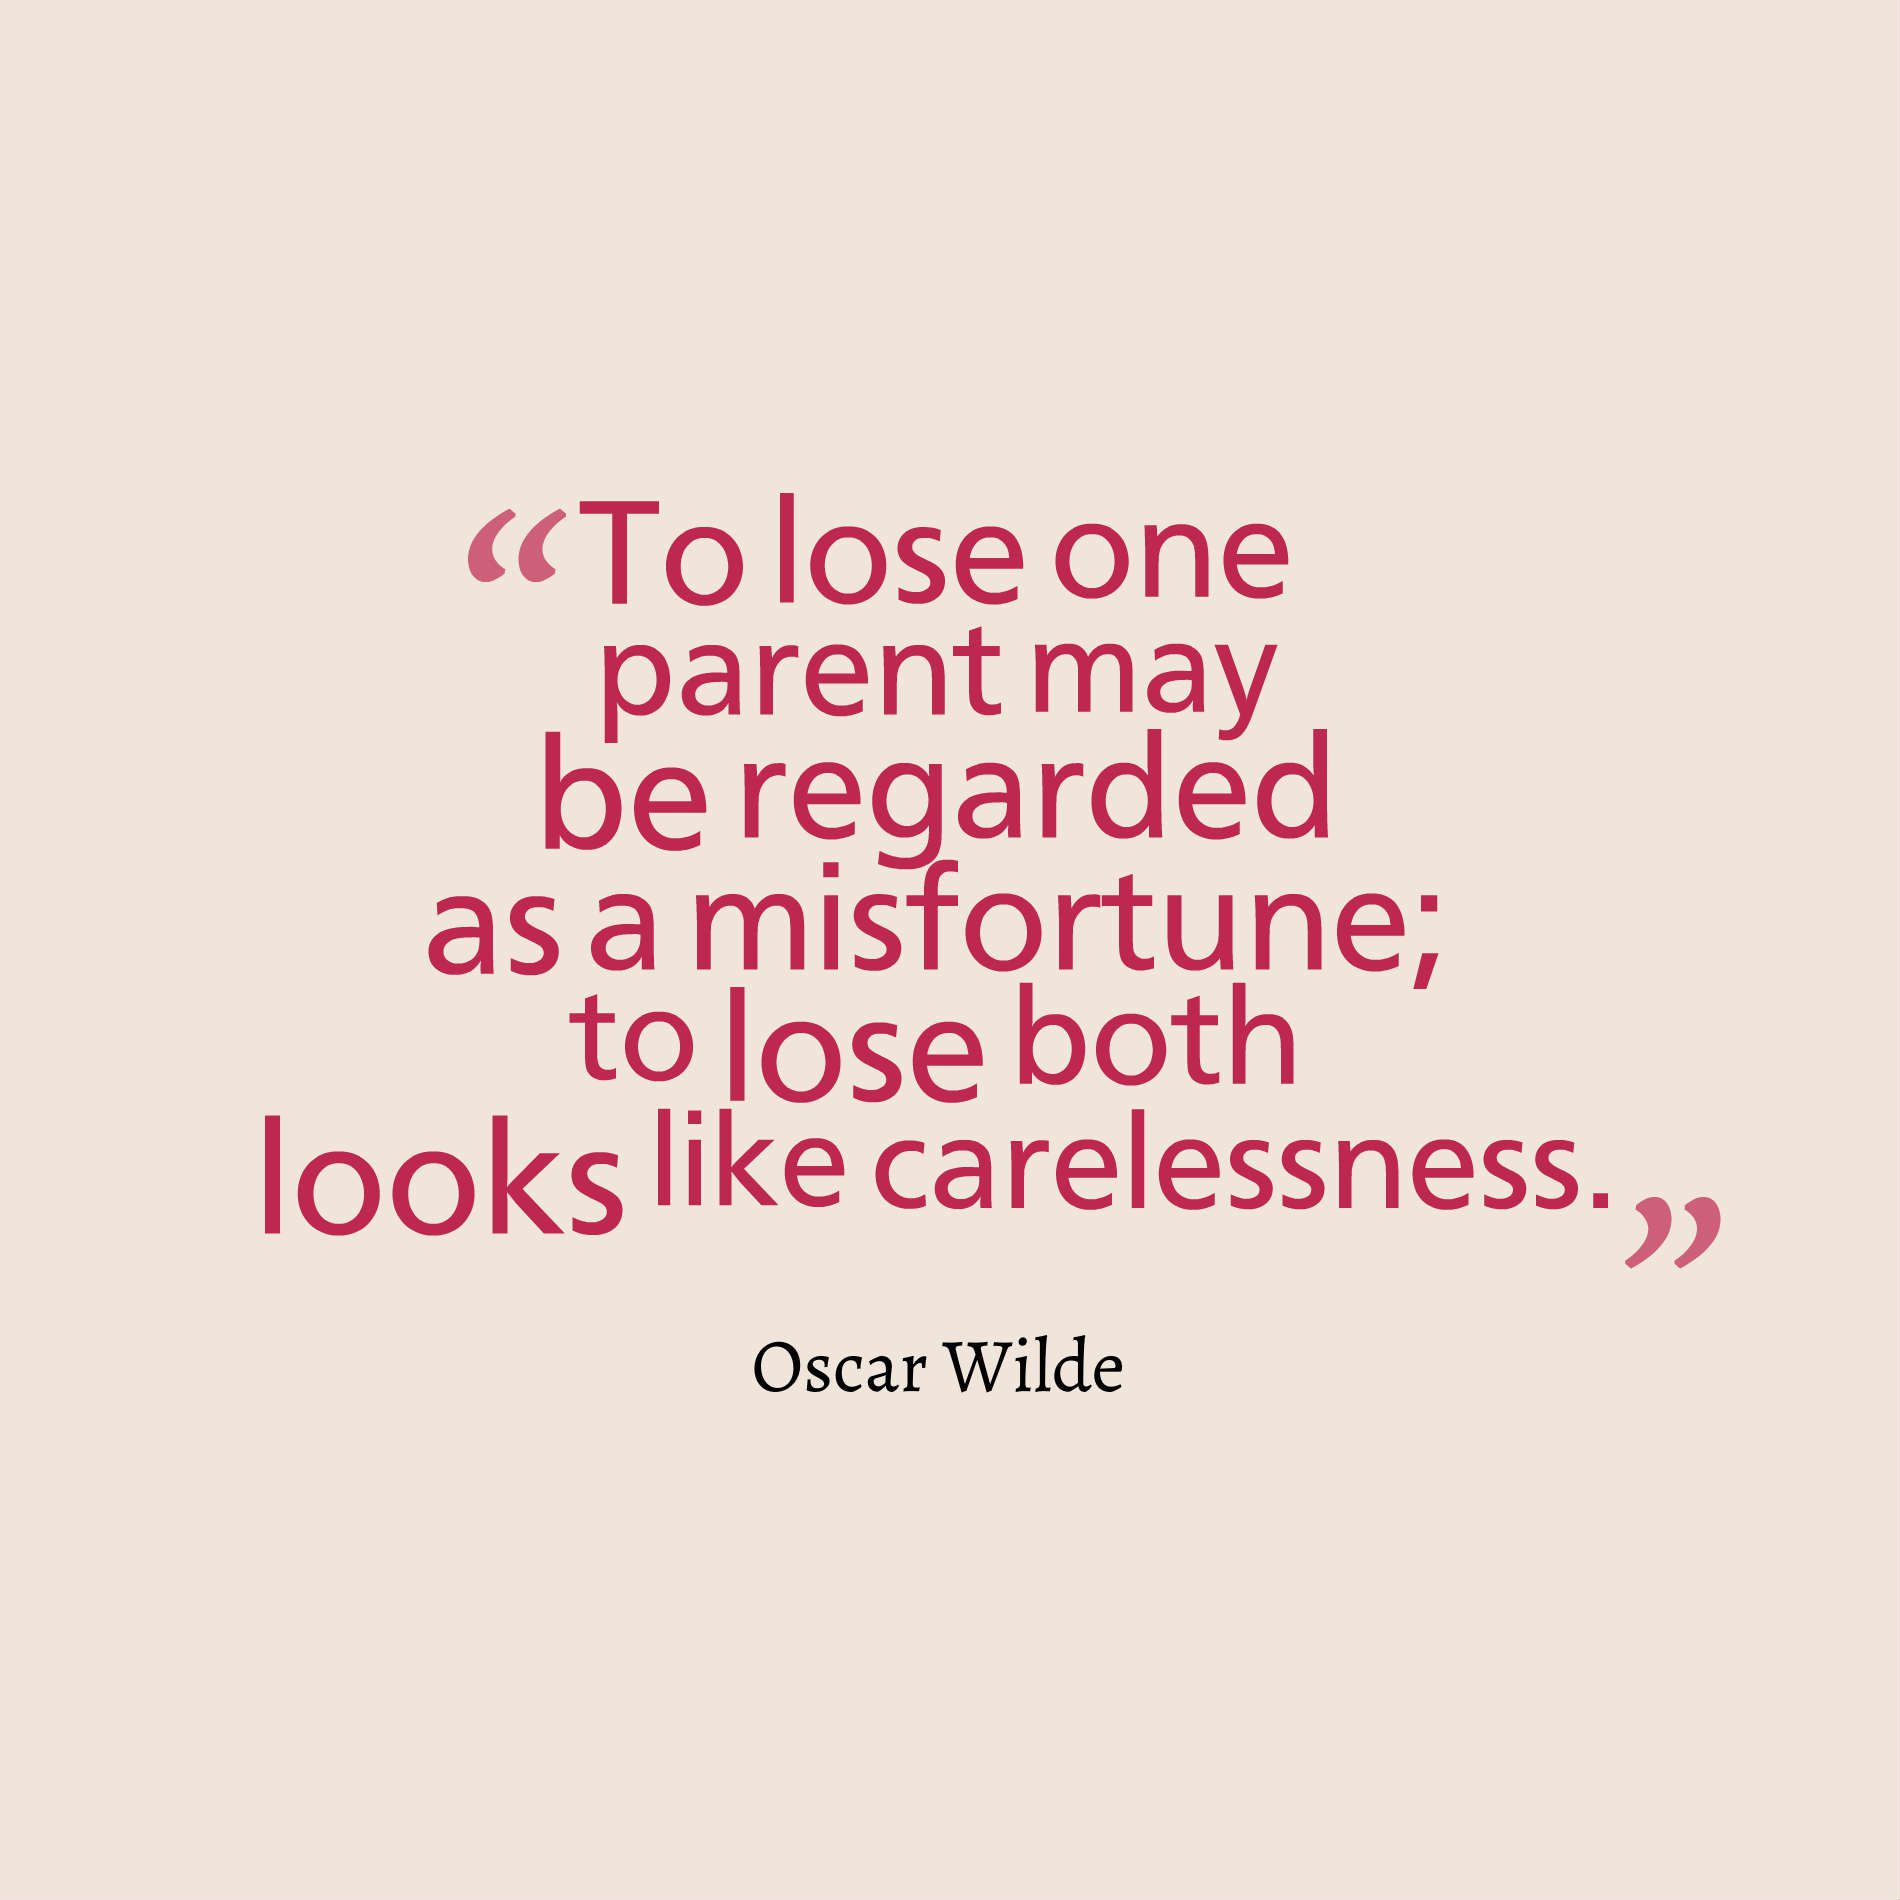 To lose one parent may be regarded as a misfortune to lose both looks like carelessness.